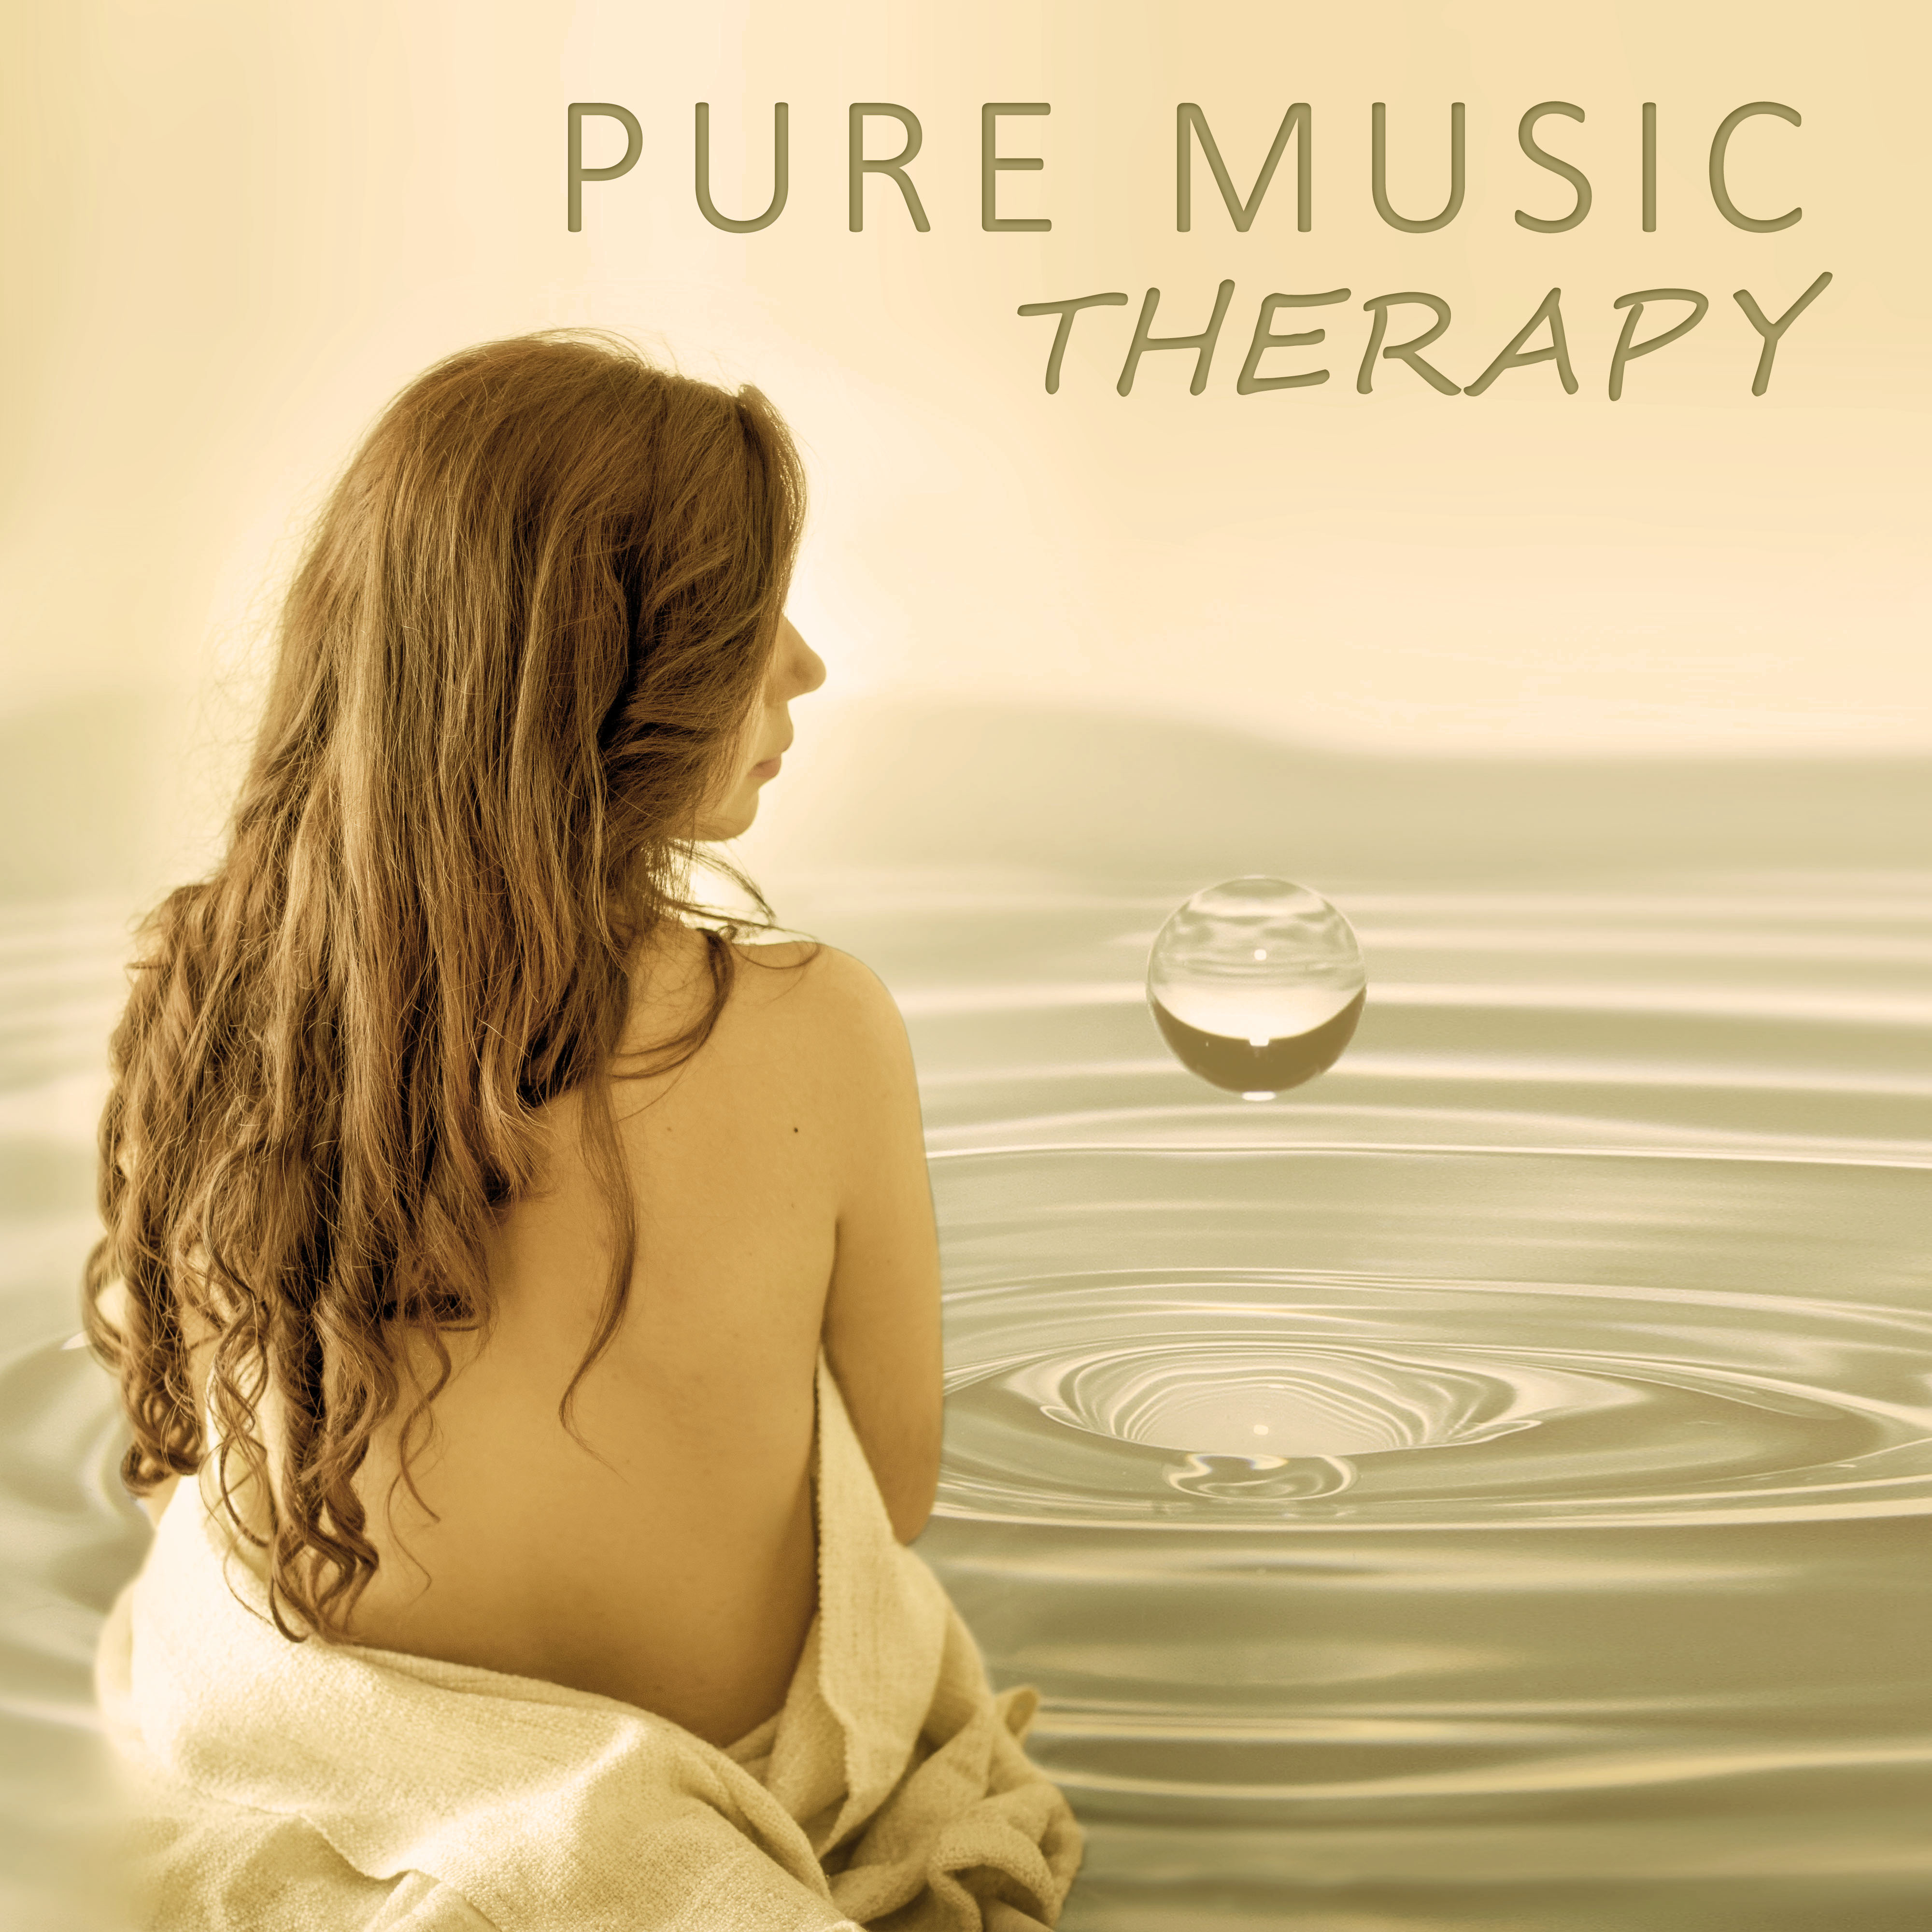 Pure Music Therapy – Healing Music, Mindfulness Meditations, Peaceful Music, Calmness, Tranquility, Stress Relief